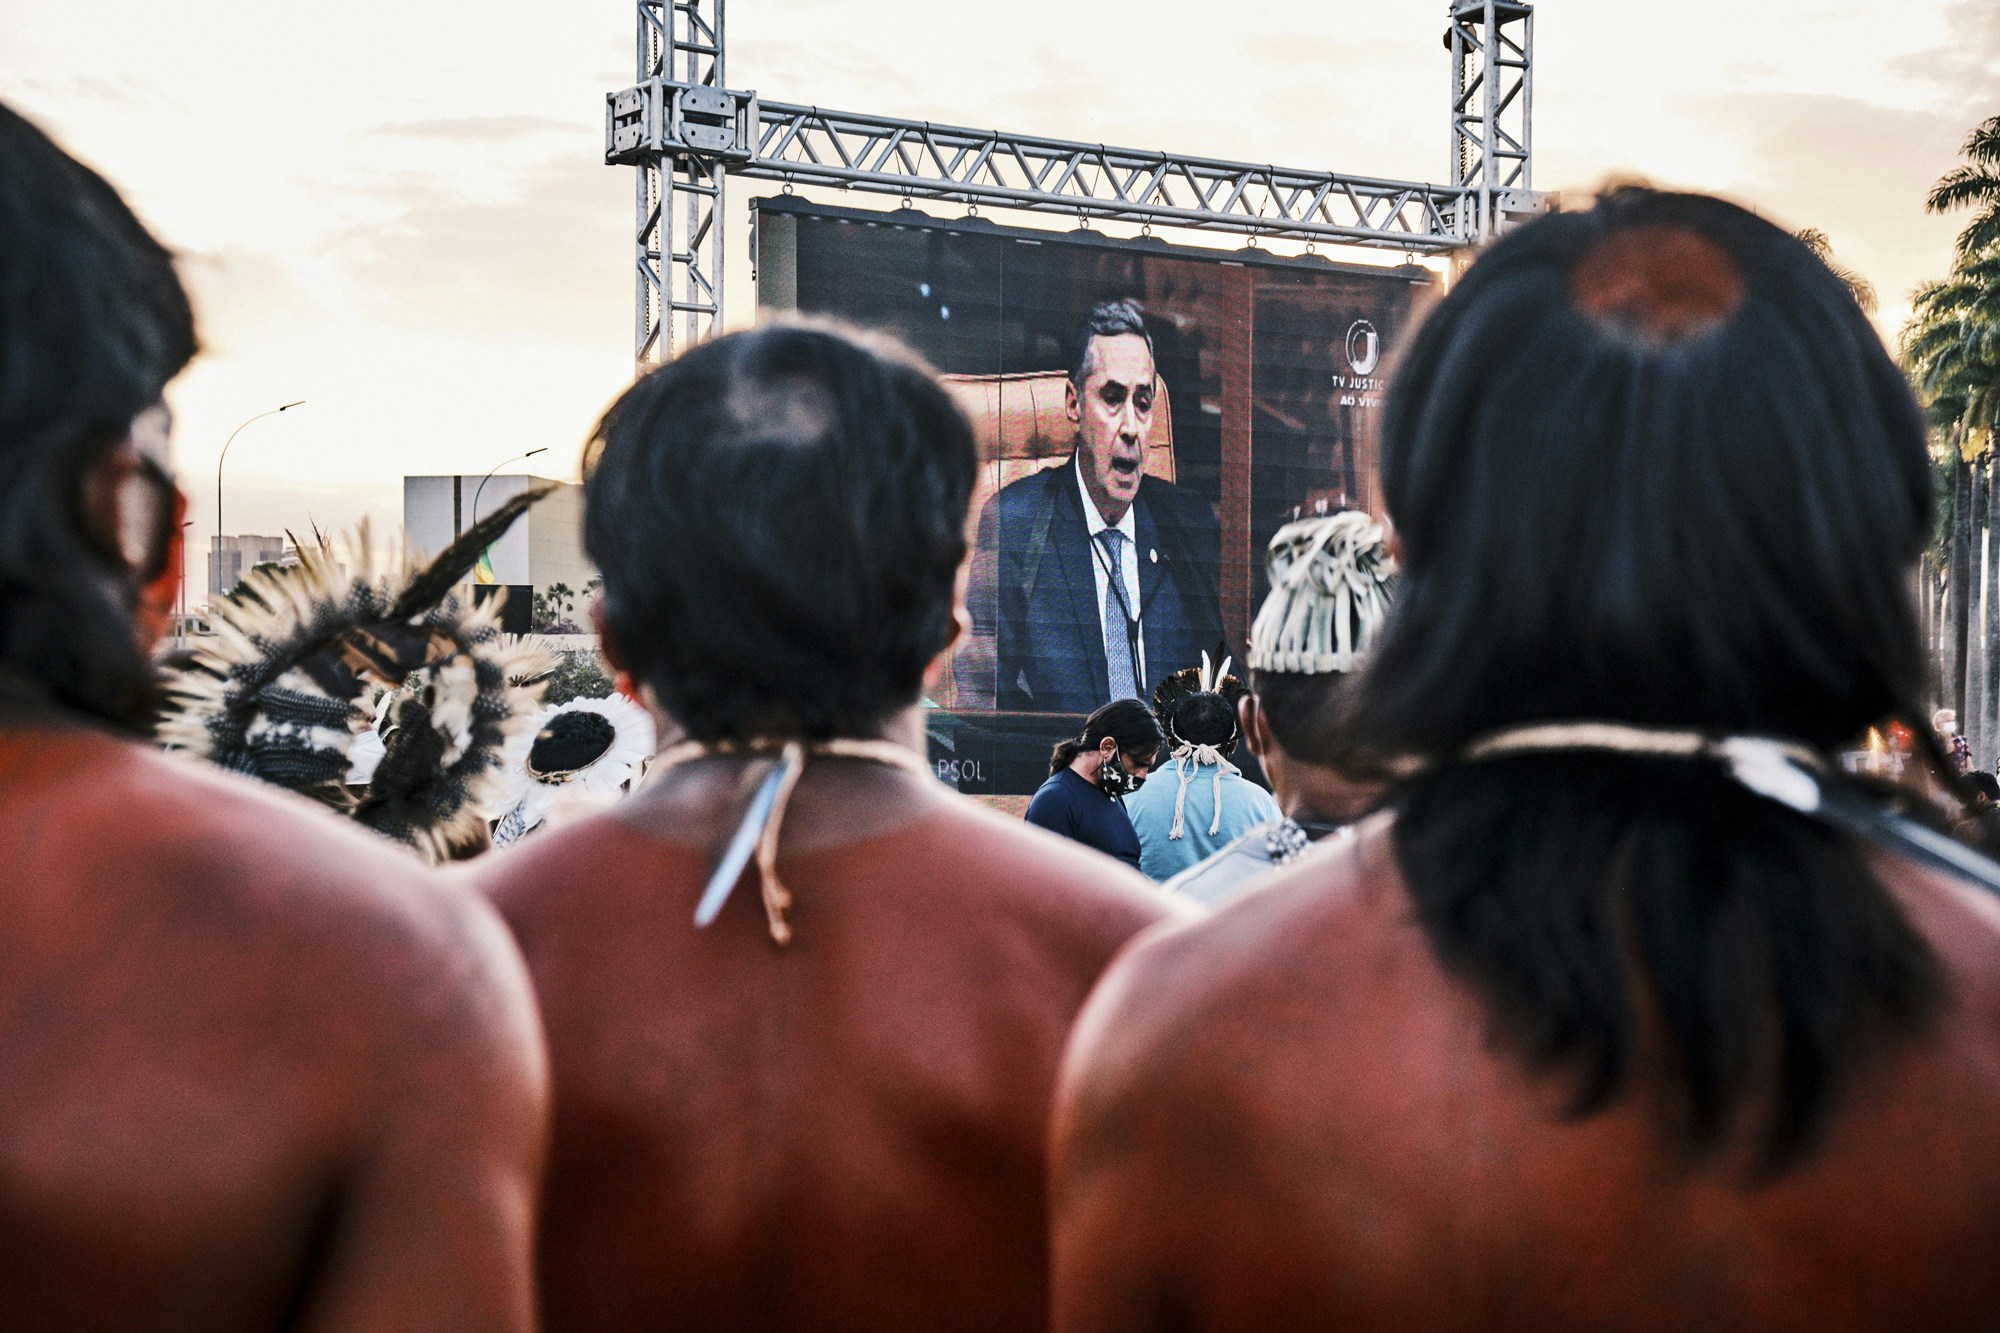 A screen shows Supreme Court Justice Luis Roberto Barroso during a protest against a land demarcation judgment outside the Supreme Court building in Brasilia, Brazil, on Wednesday, Aug. 25, 2021. Indigenous protesters have gathered in Brasilia this week to protest a Supreme Court judgment on Wednesday that could take away ancestral lands. Photographer: Gustavo Minas/Bloomberg via Getty Images